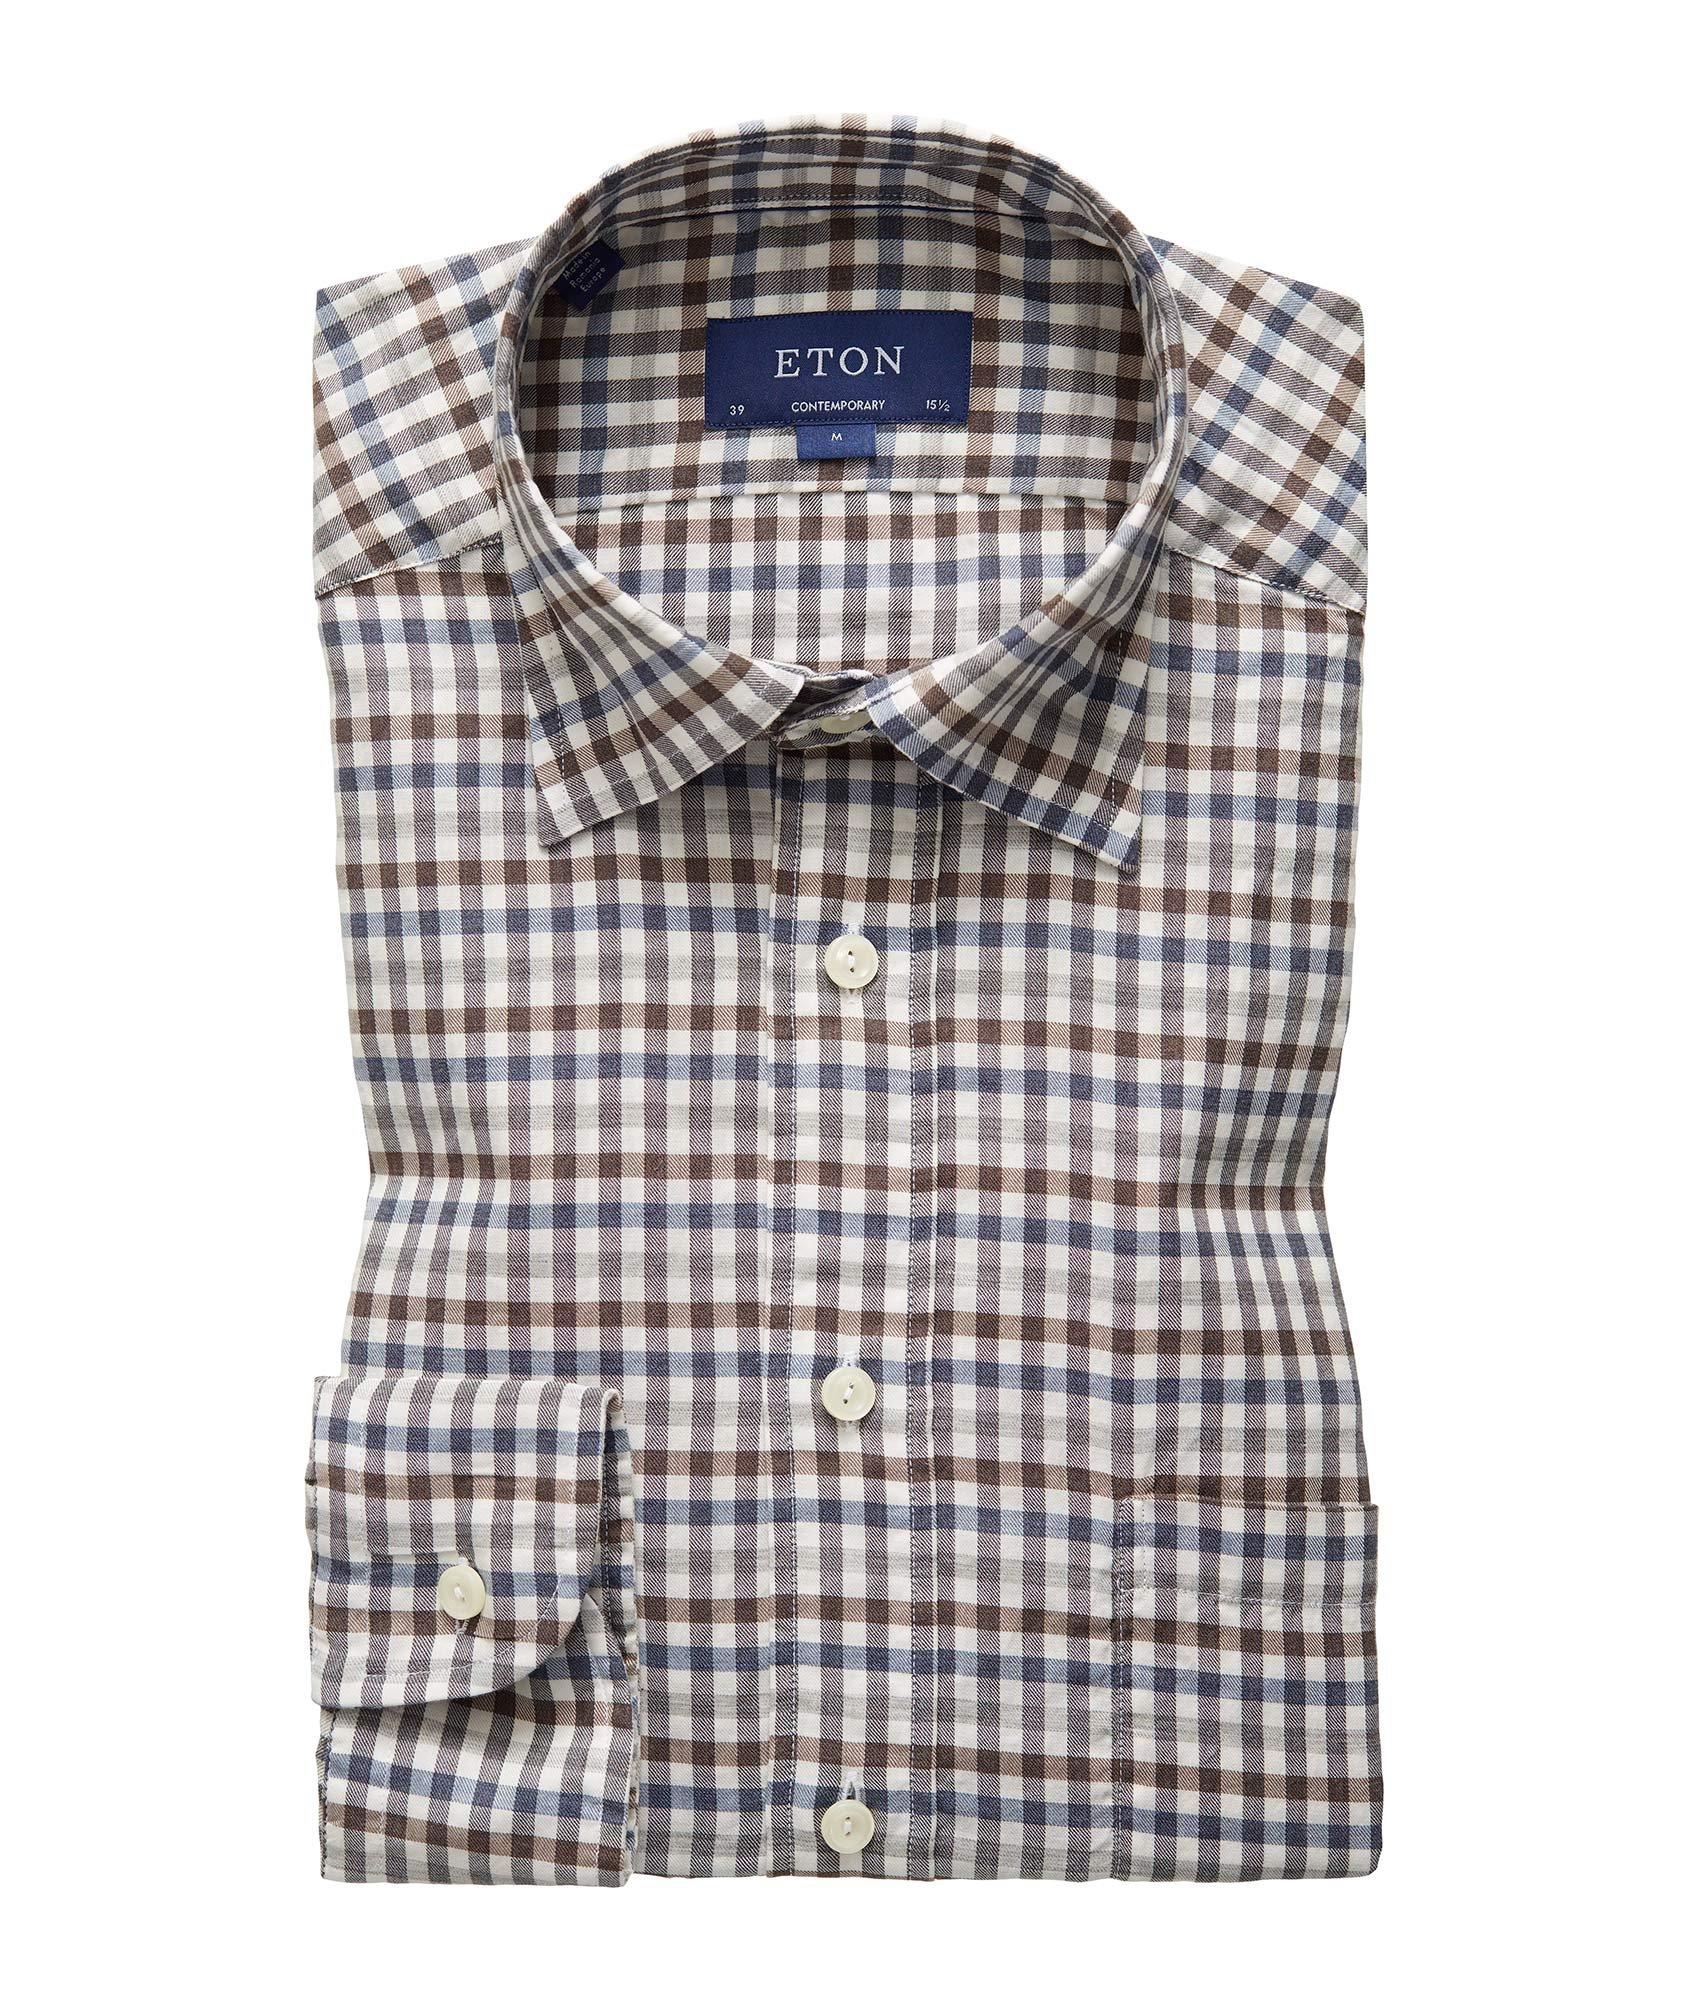 Soft Contemporary Fit Gingham-Checked Shirt image 0